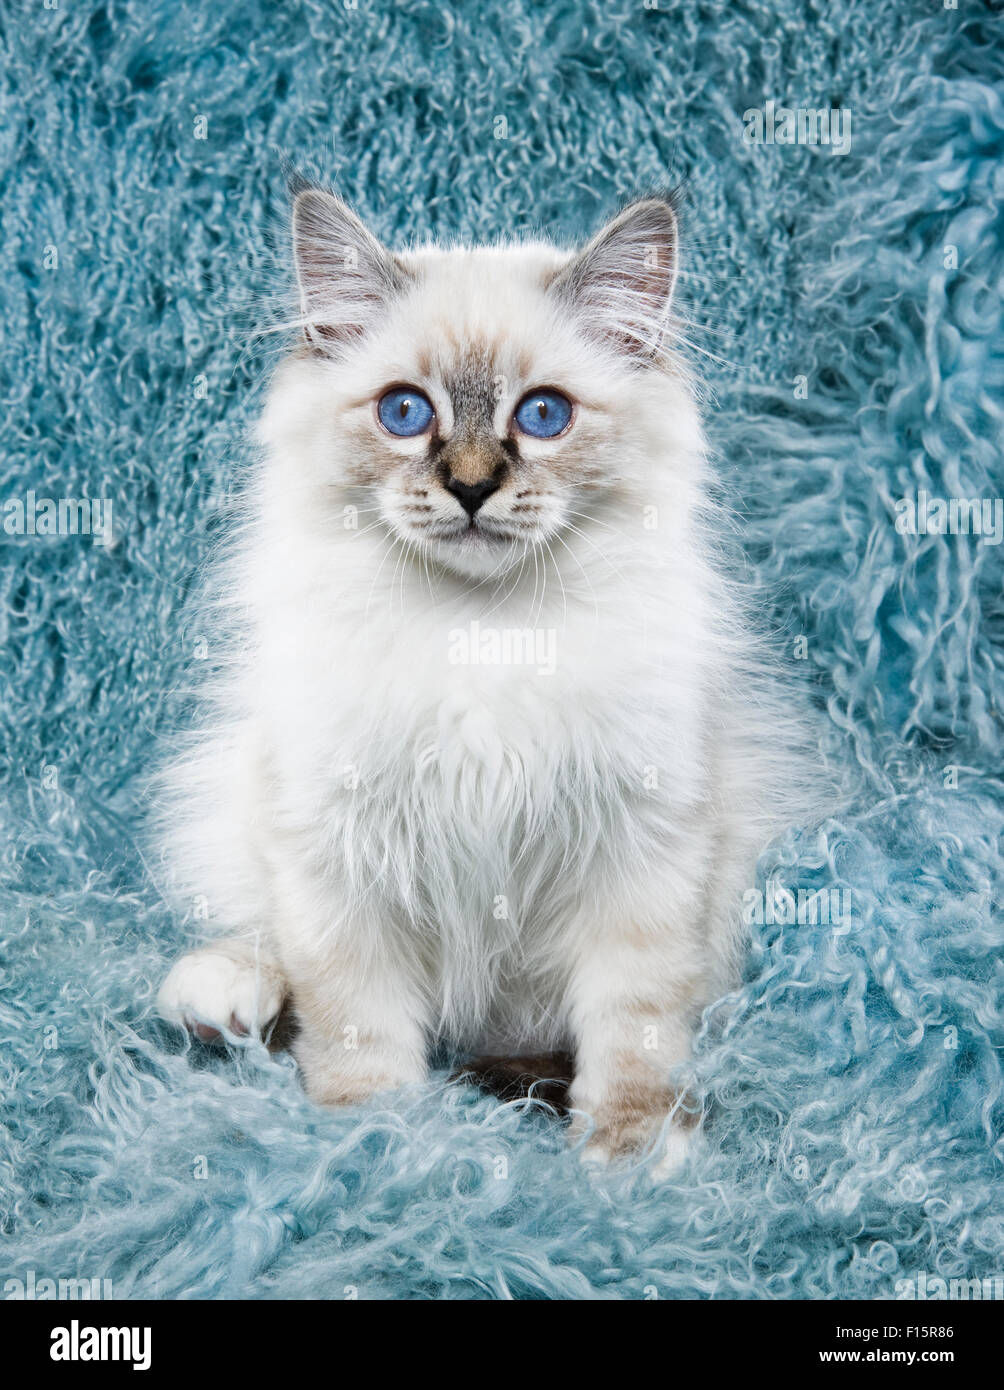 portrait of fluffy white Ragdoll kitten with piercing blue eyes on turquoise long hair textured background Stock Photo